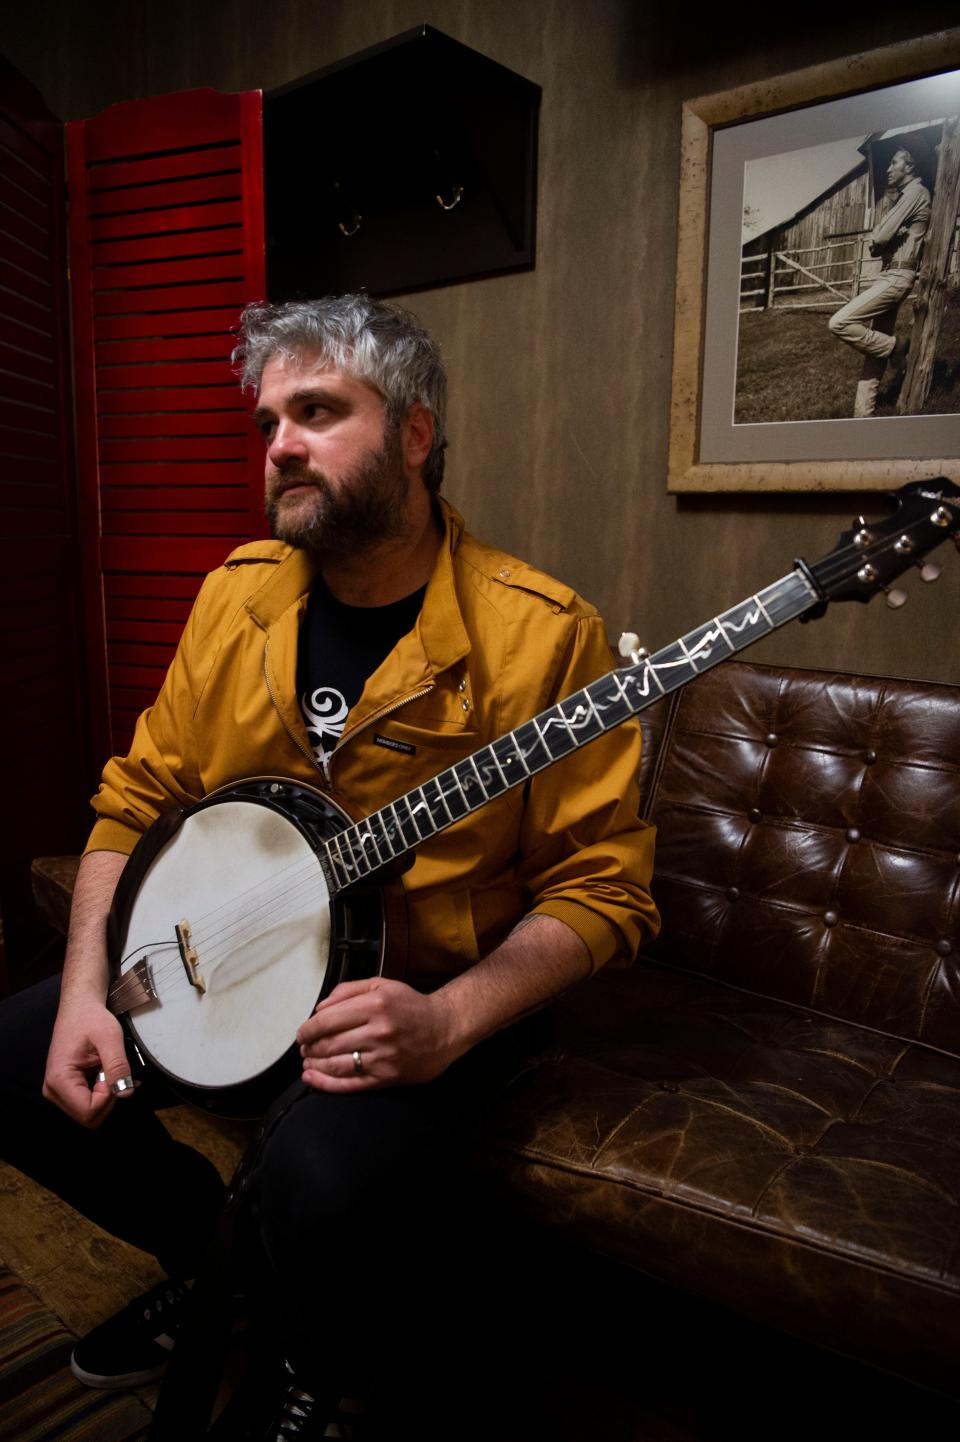 Banjo player Matt Menefee of the Wood Box Heroes was inspired by the work of New Grass Revival artists like John Cowan and Bela Fleck.